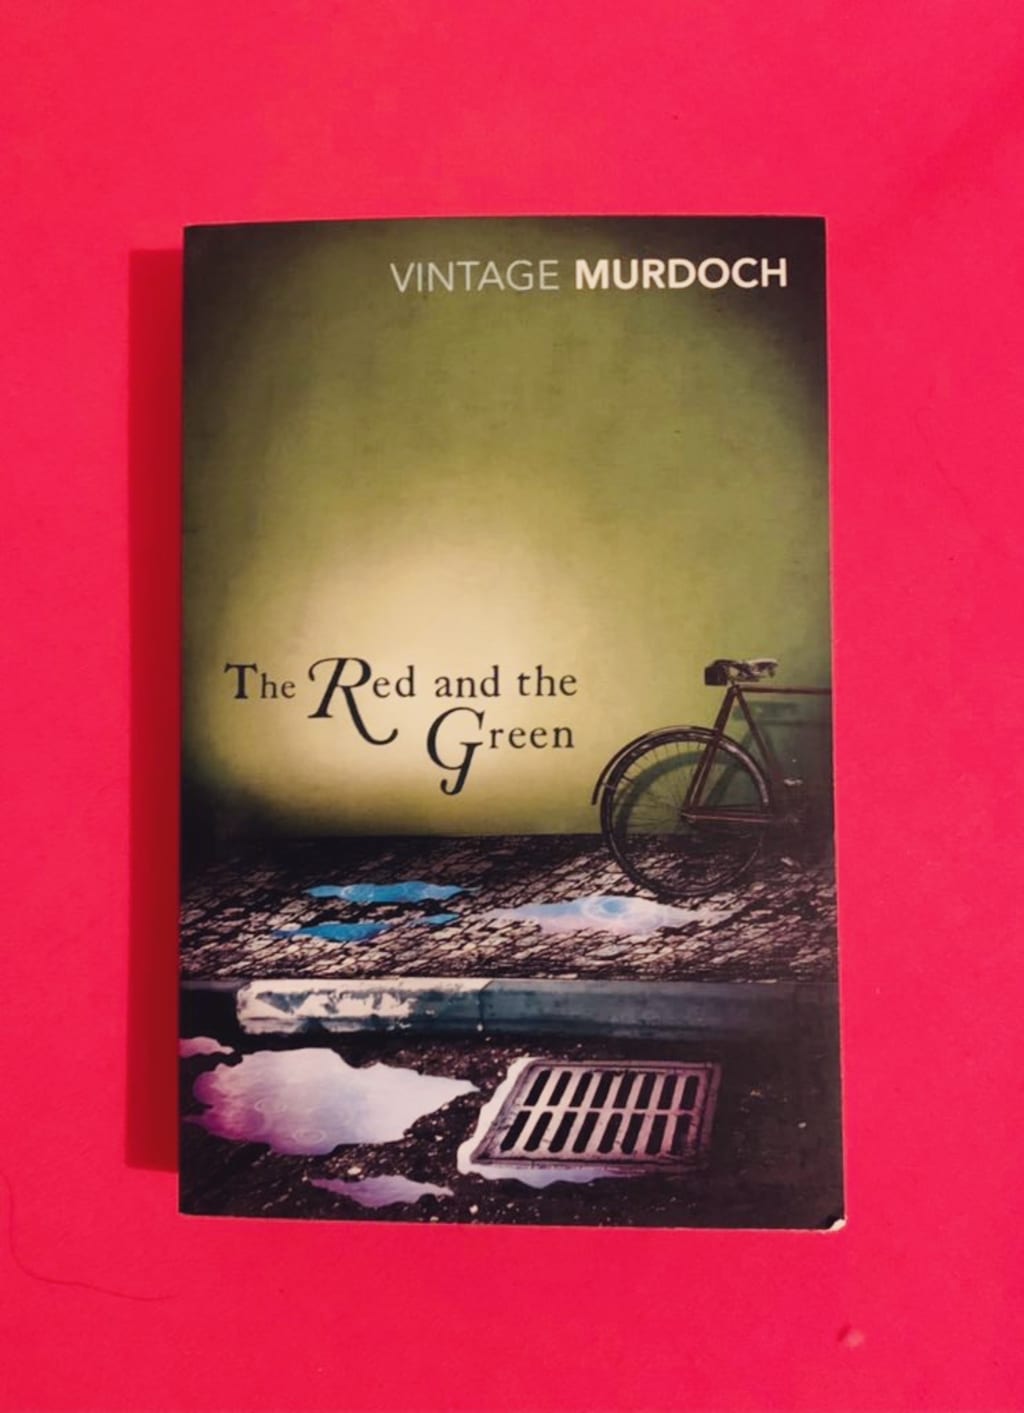 kold dræbe lejlighed Book Review: "The Red and the Green" by Iris Murdoch | Geeks